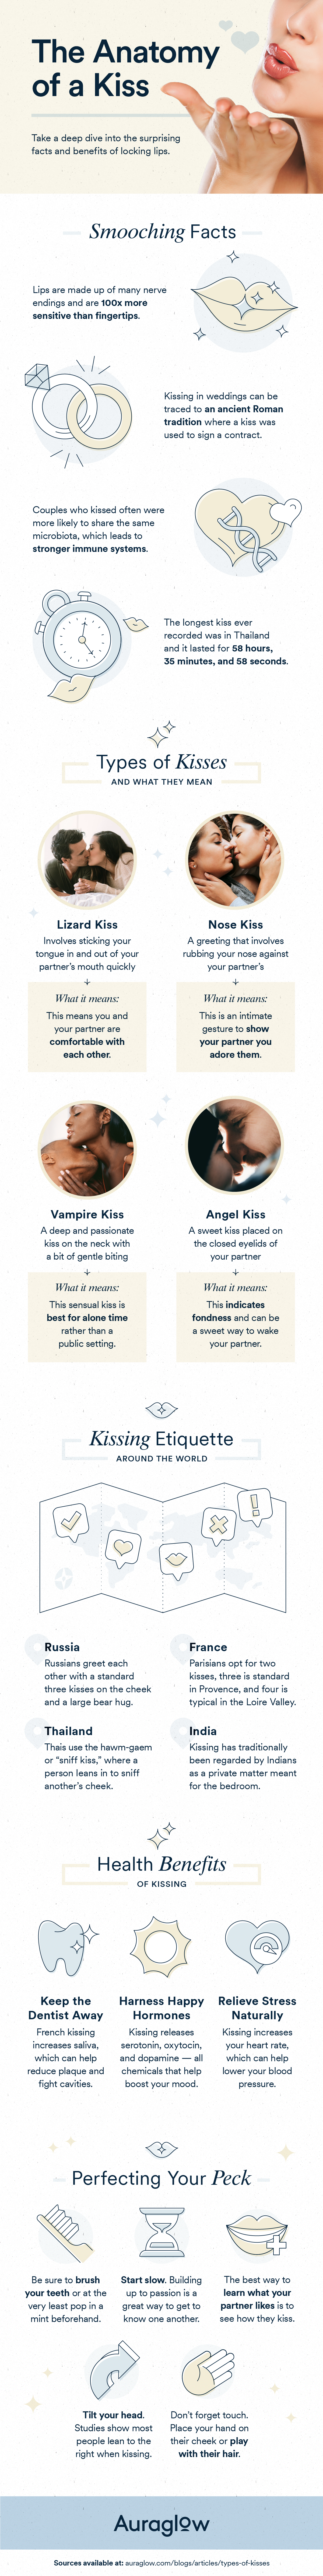 types of kisses and what they mean ig 1